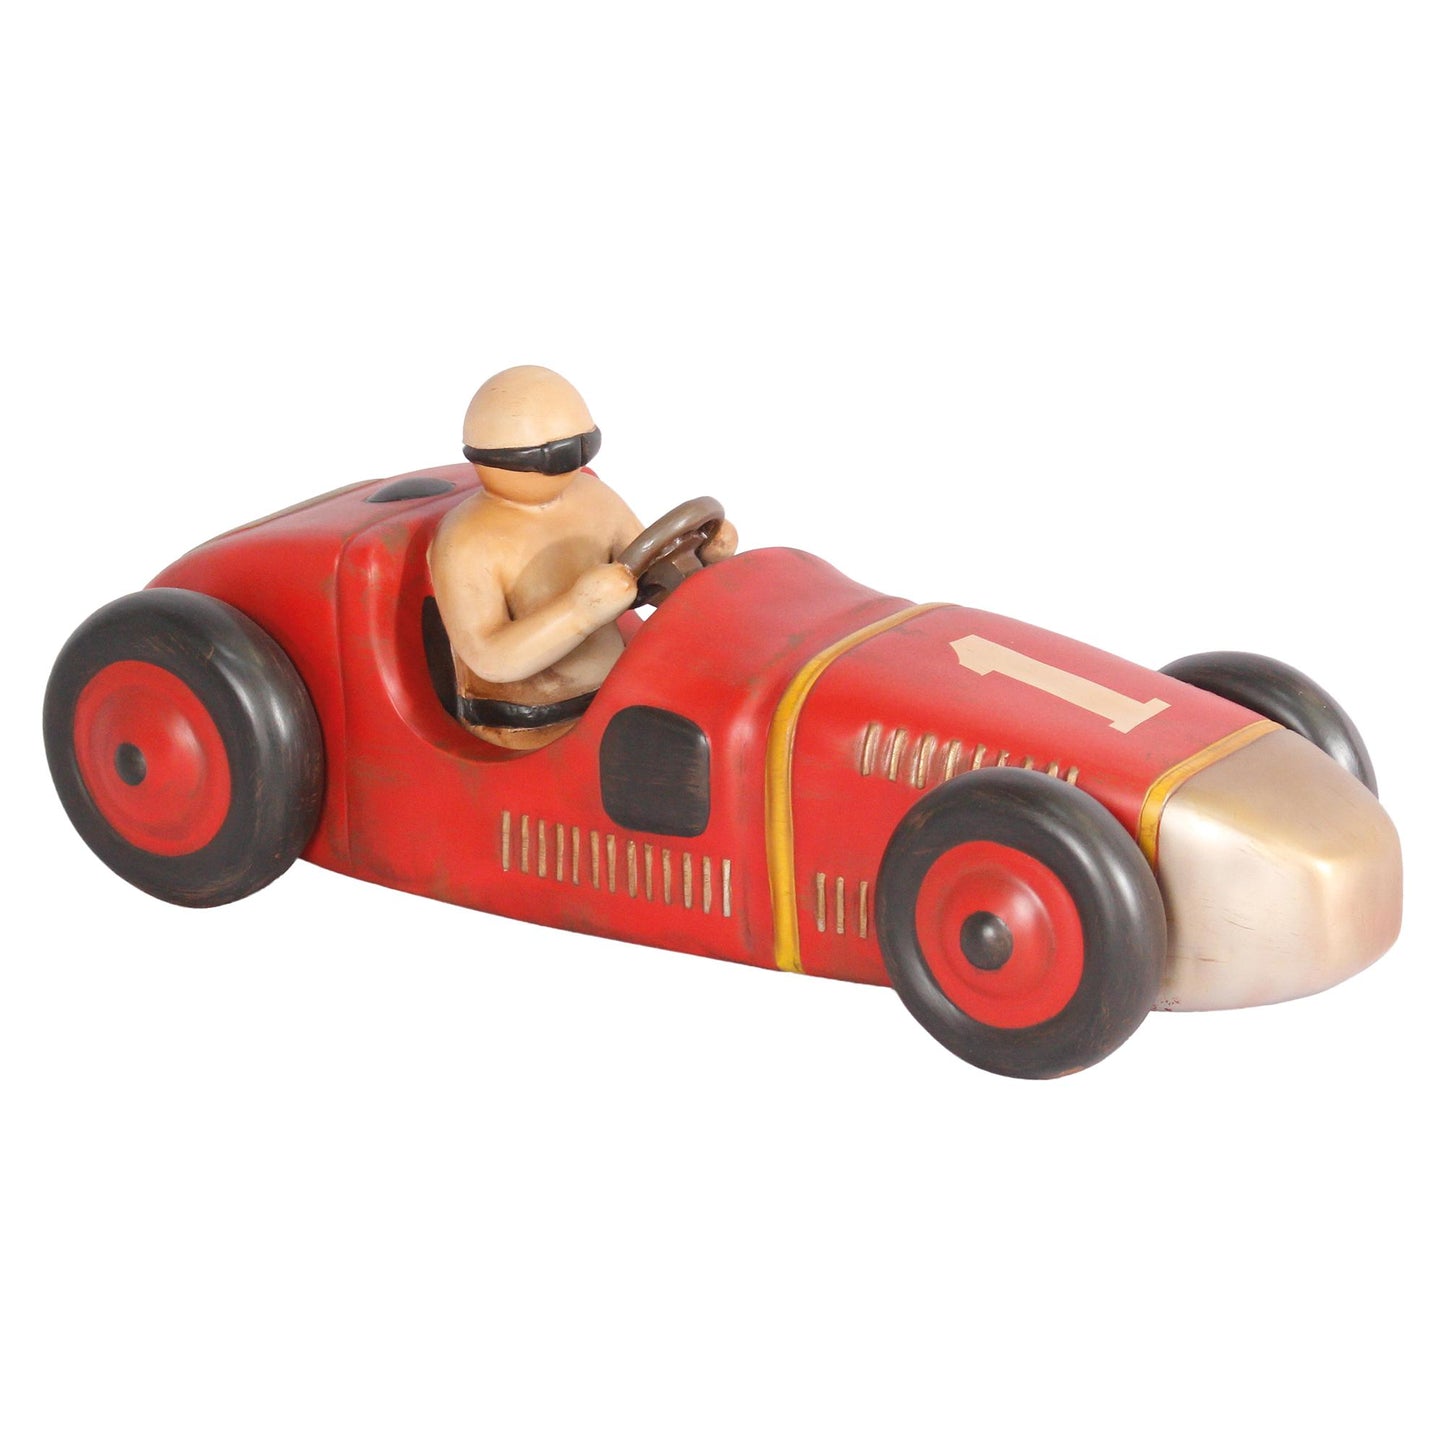 Toy Race Car Over Sized Statue